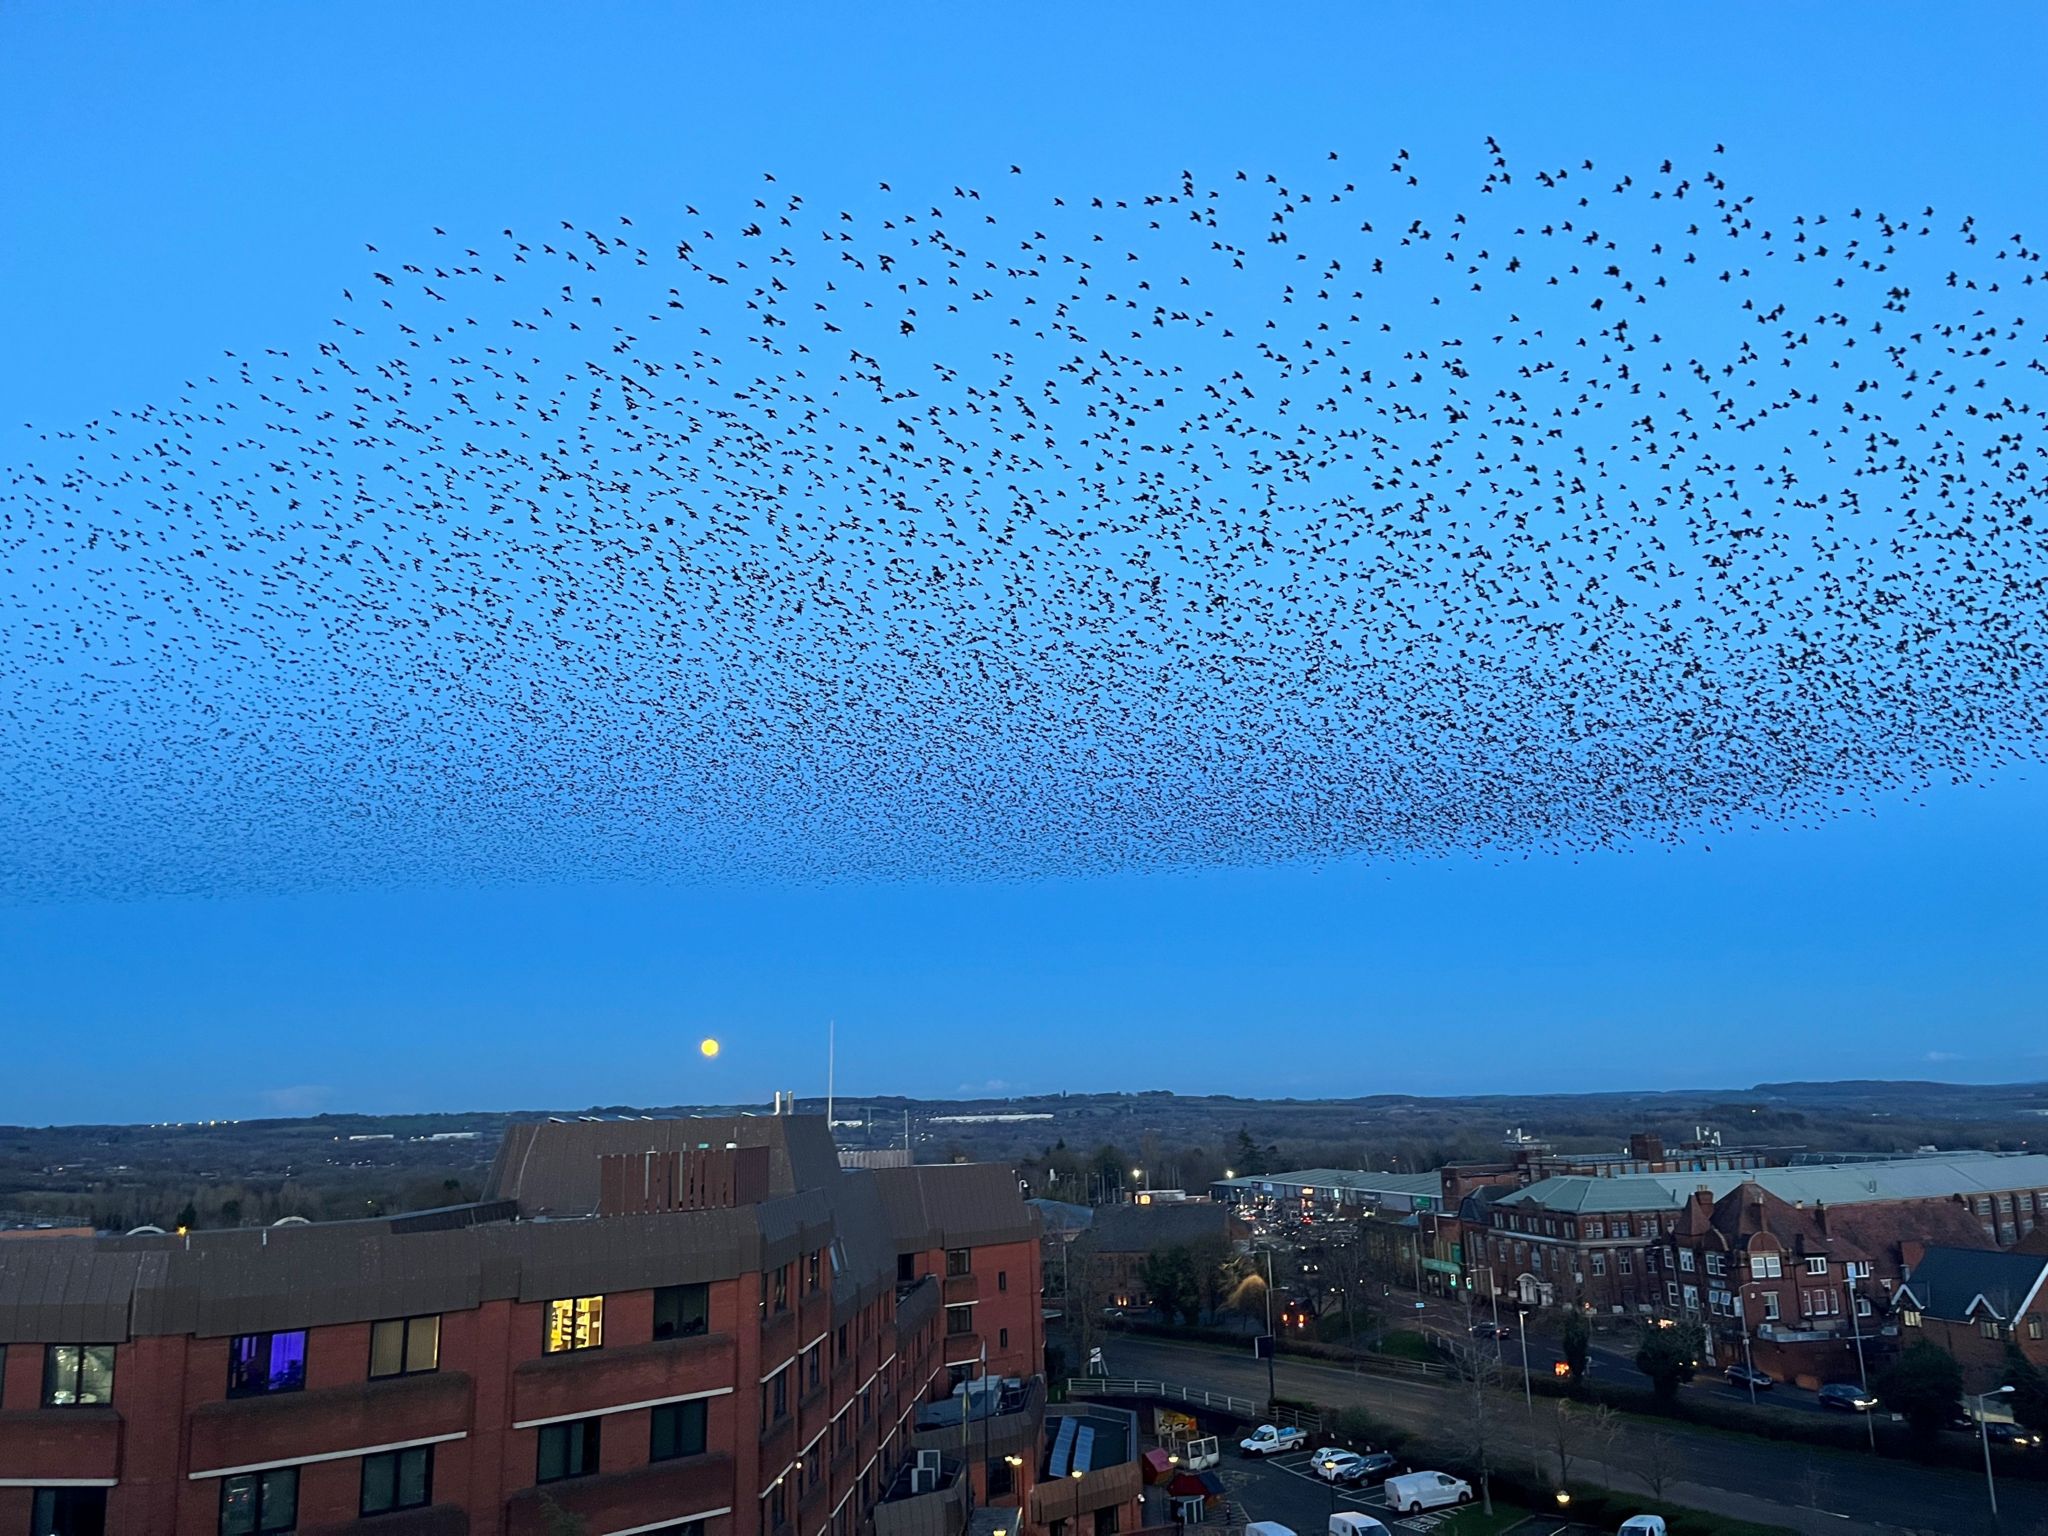 The murmuration in the sky over Redditch